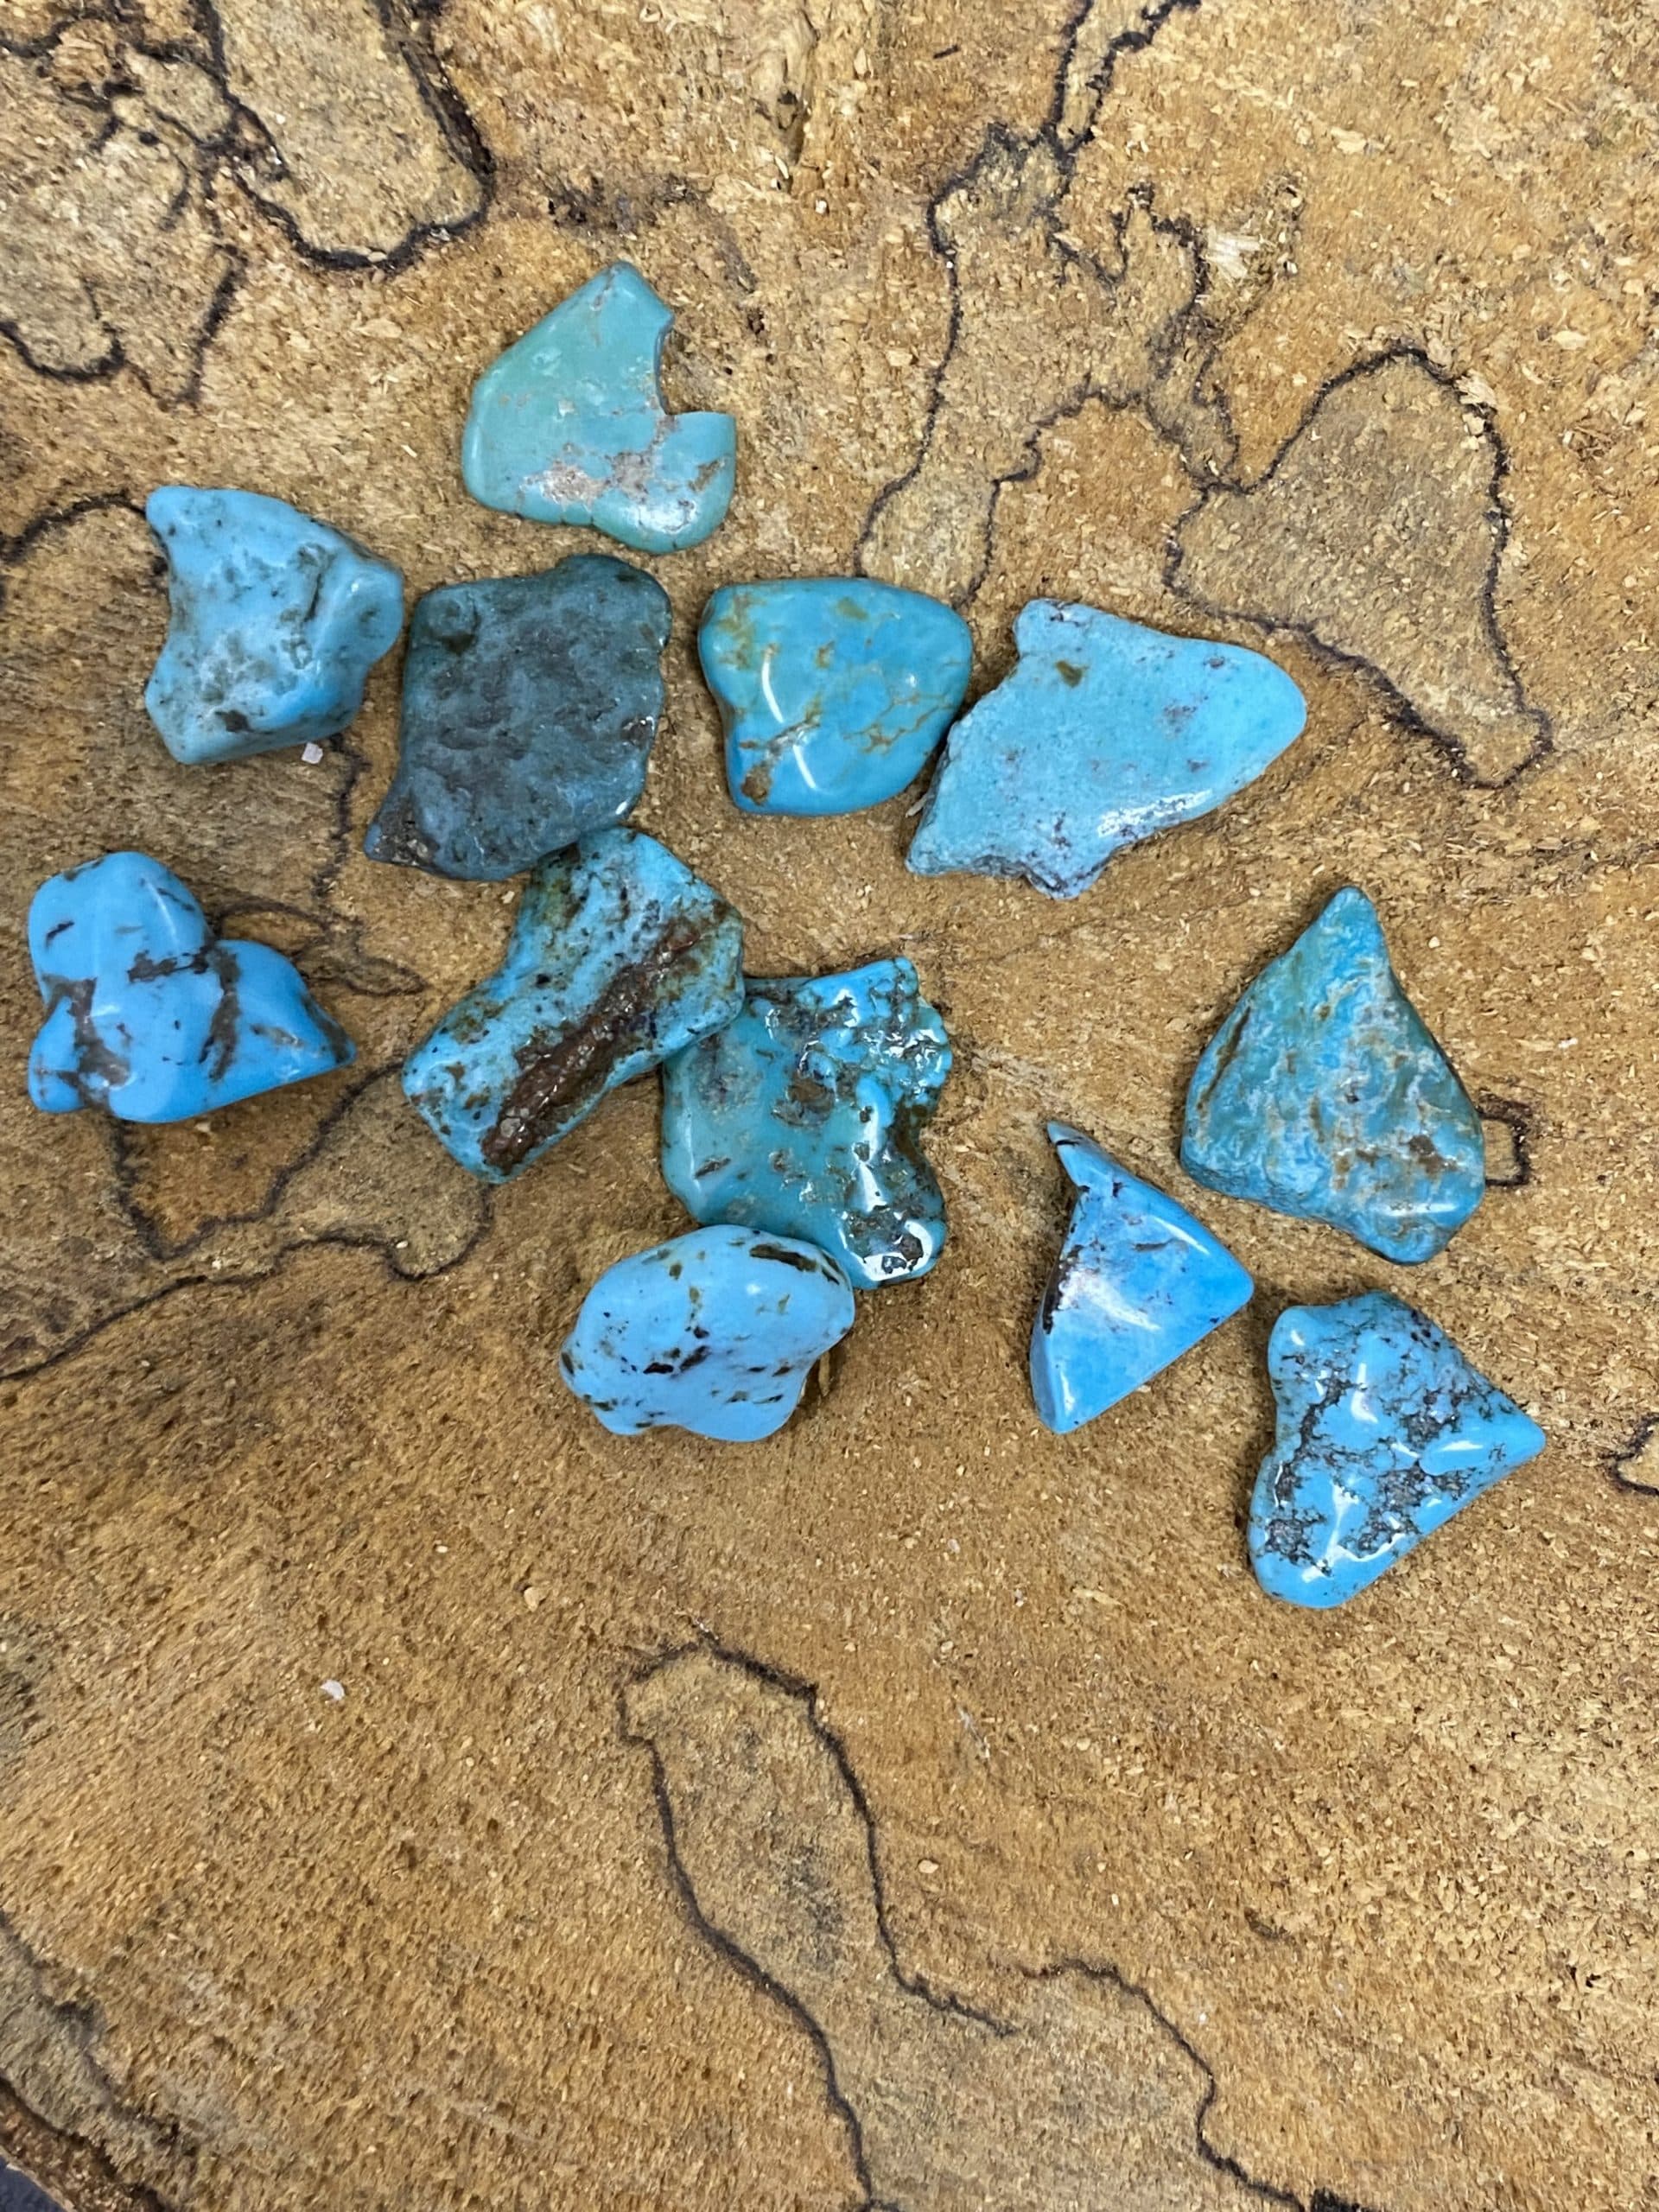 Turquoise brutes